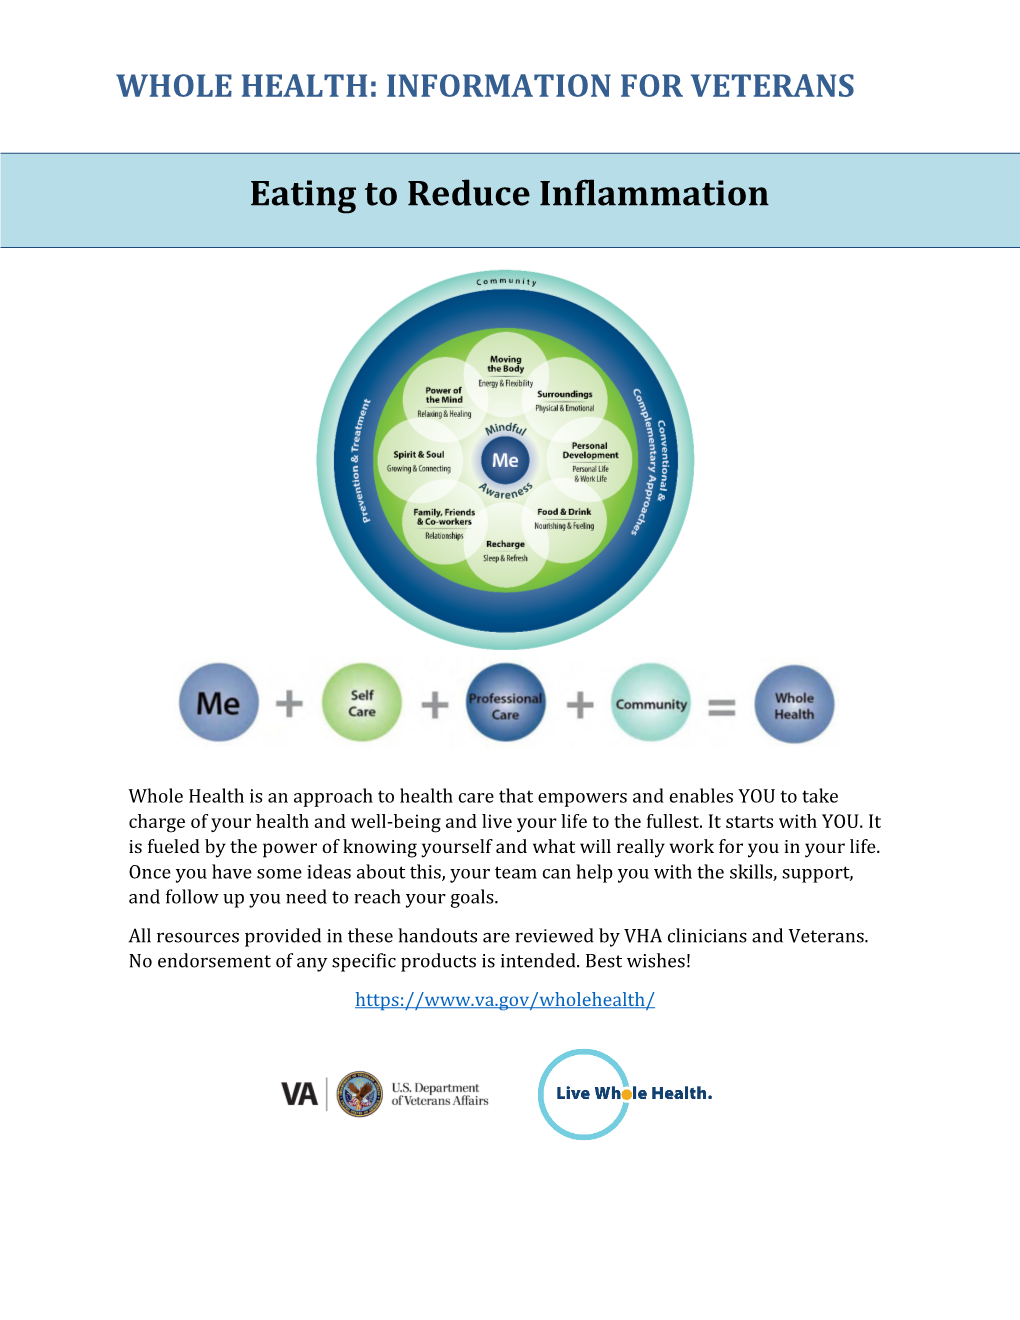 Eating to Reduce Inflammation